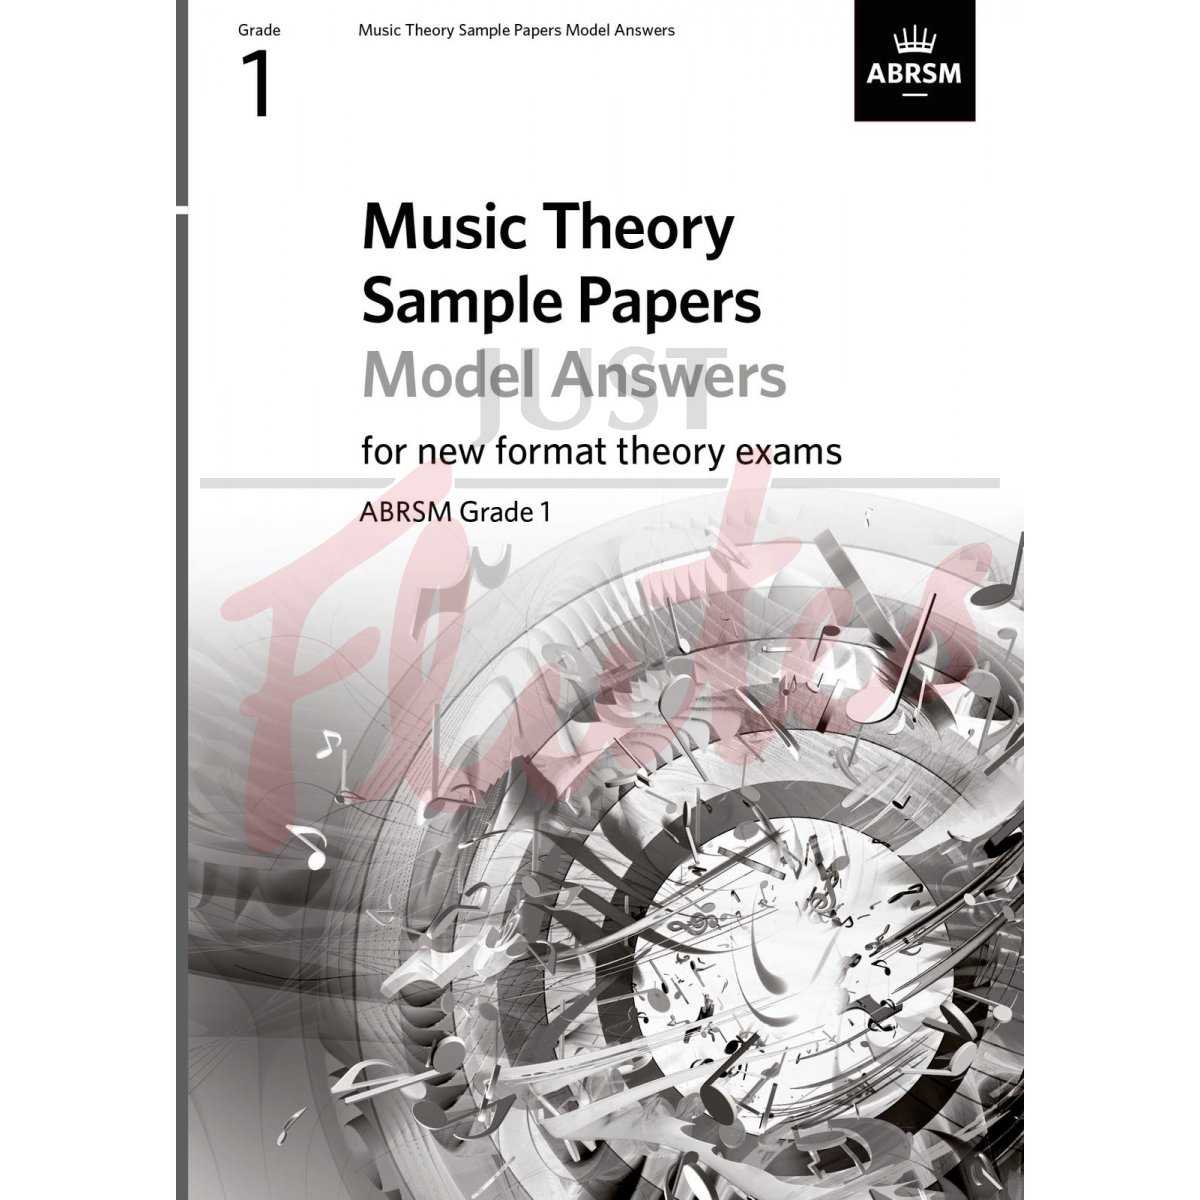 Music Theory Sample Papers Grade 1 - Model Answers